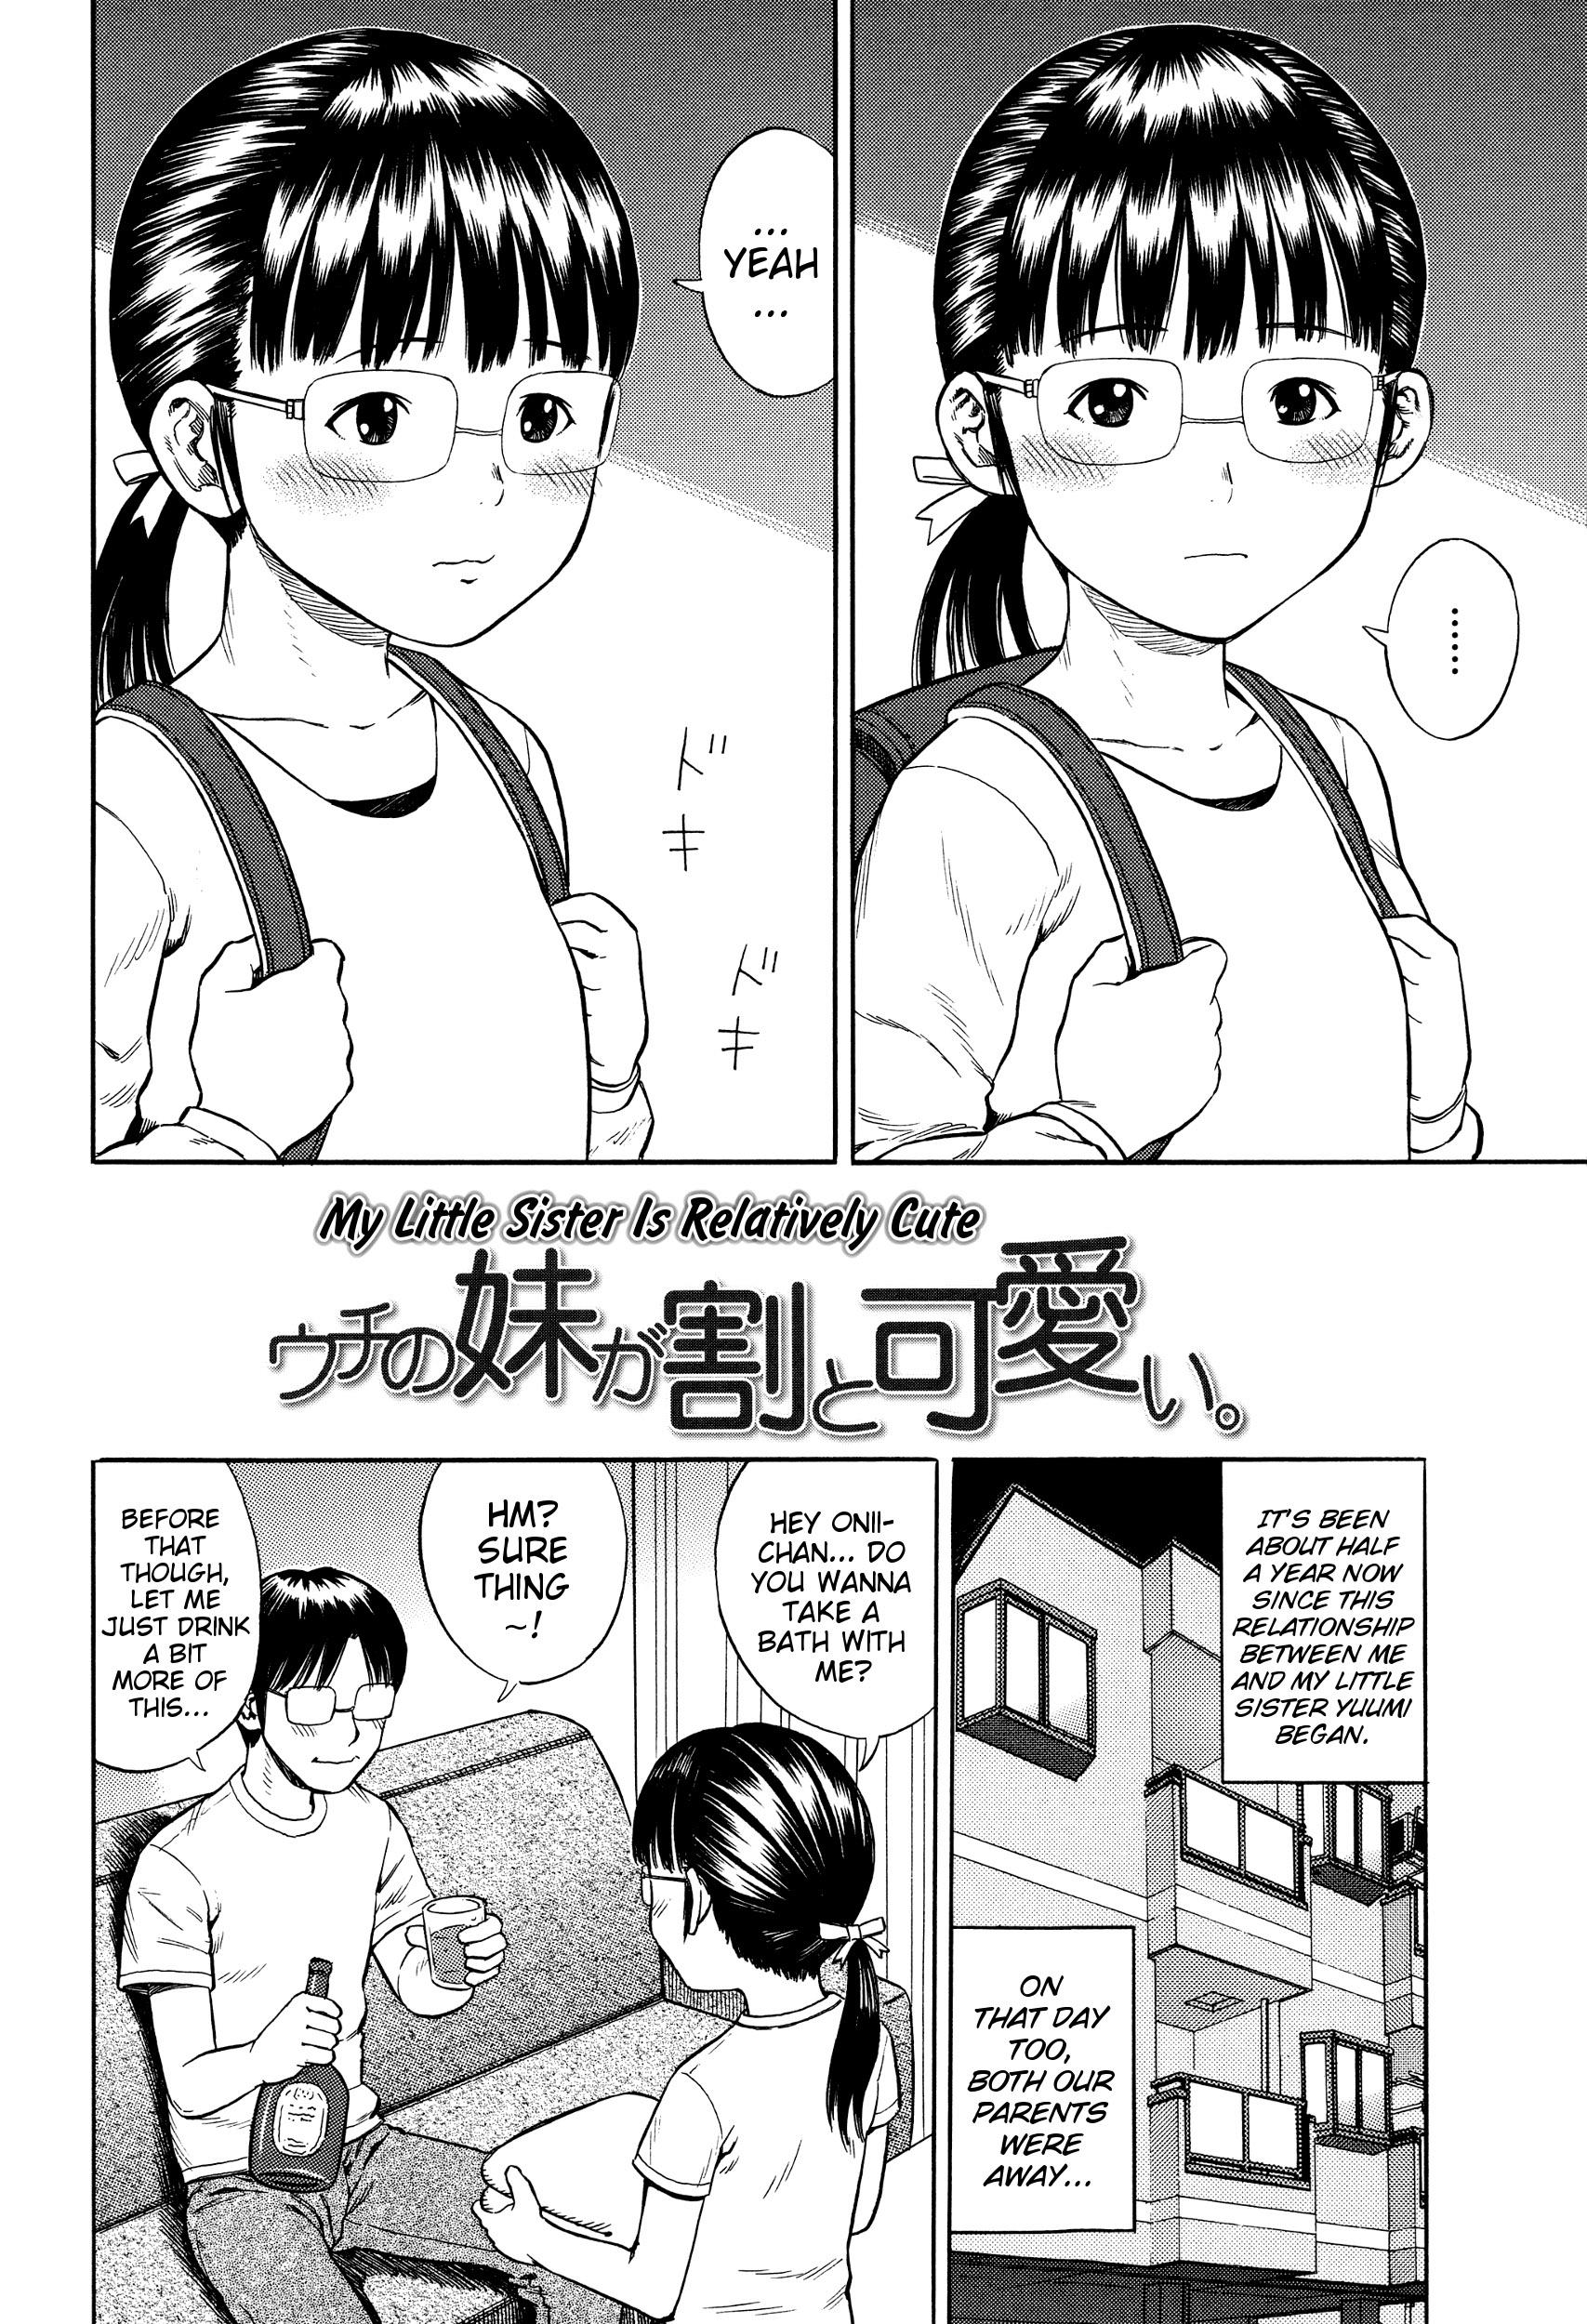 Riding Uchi no Imouto ga Warito Kawaii | My Little Sister Is Relatively Cute Butthole - Page 2